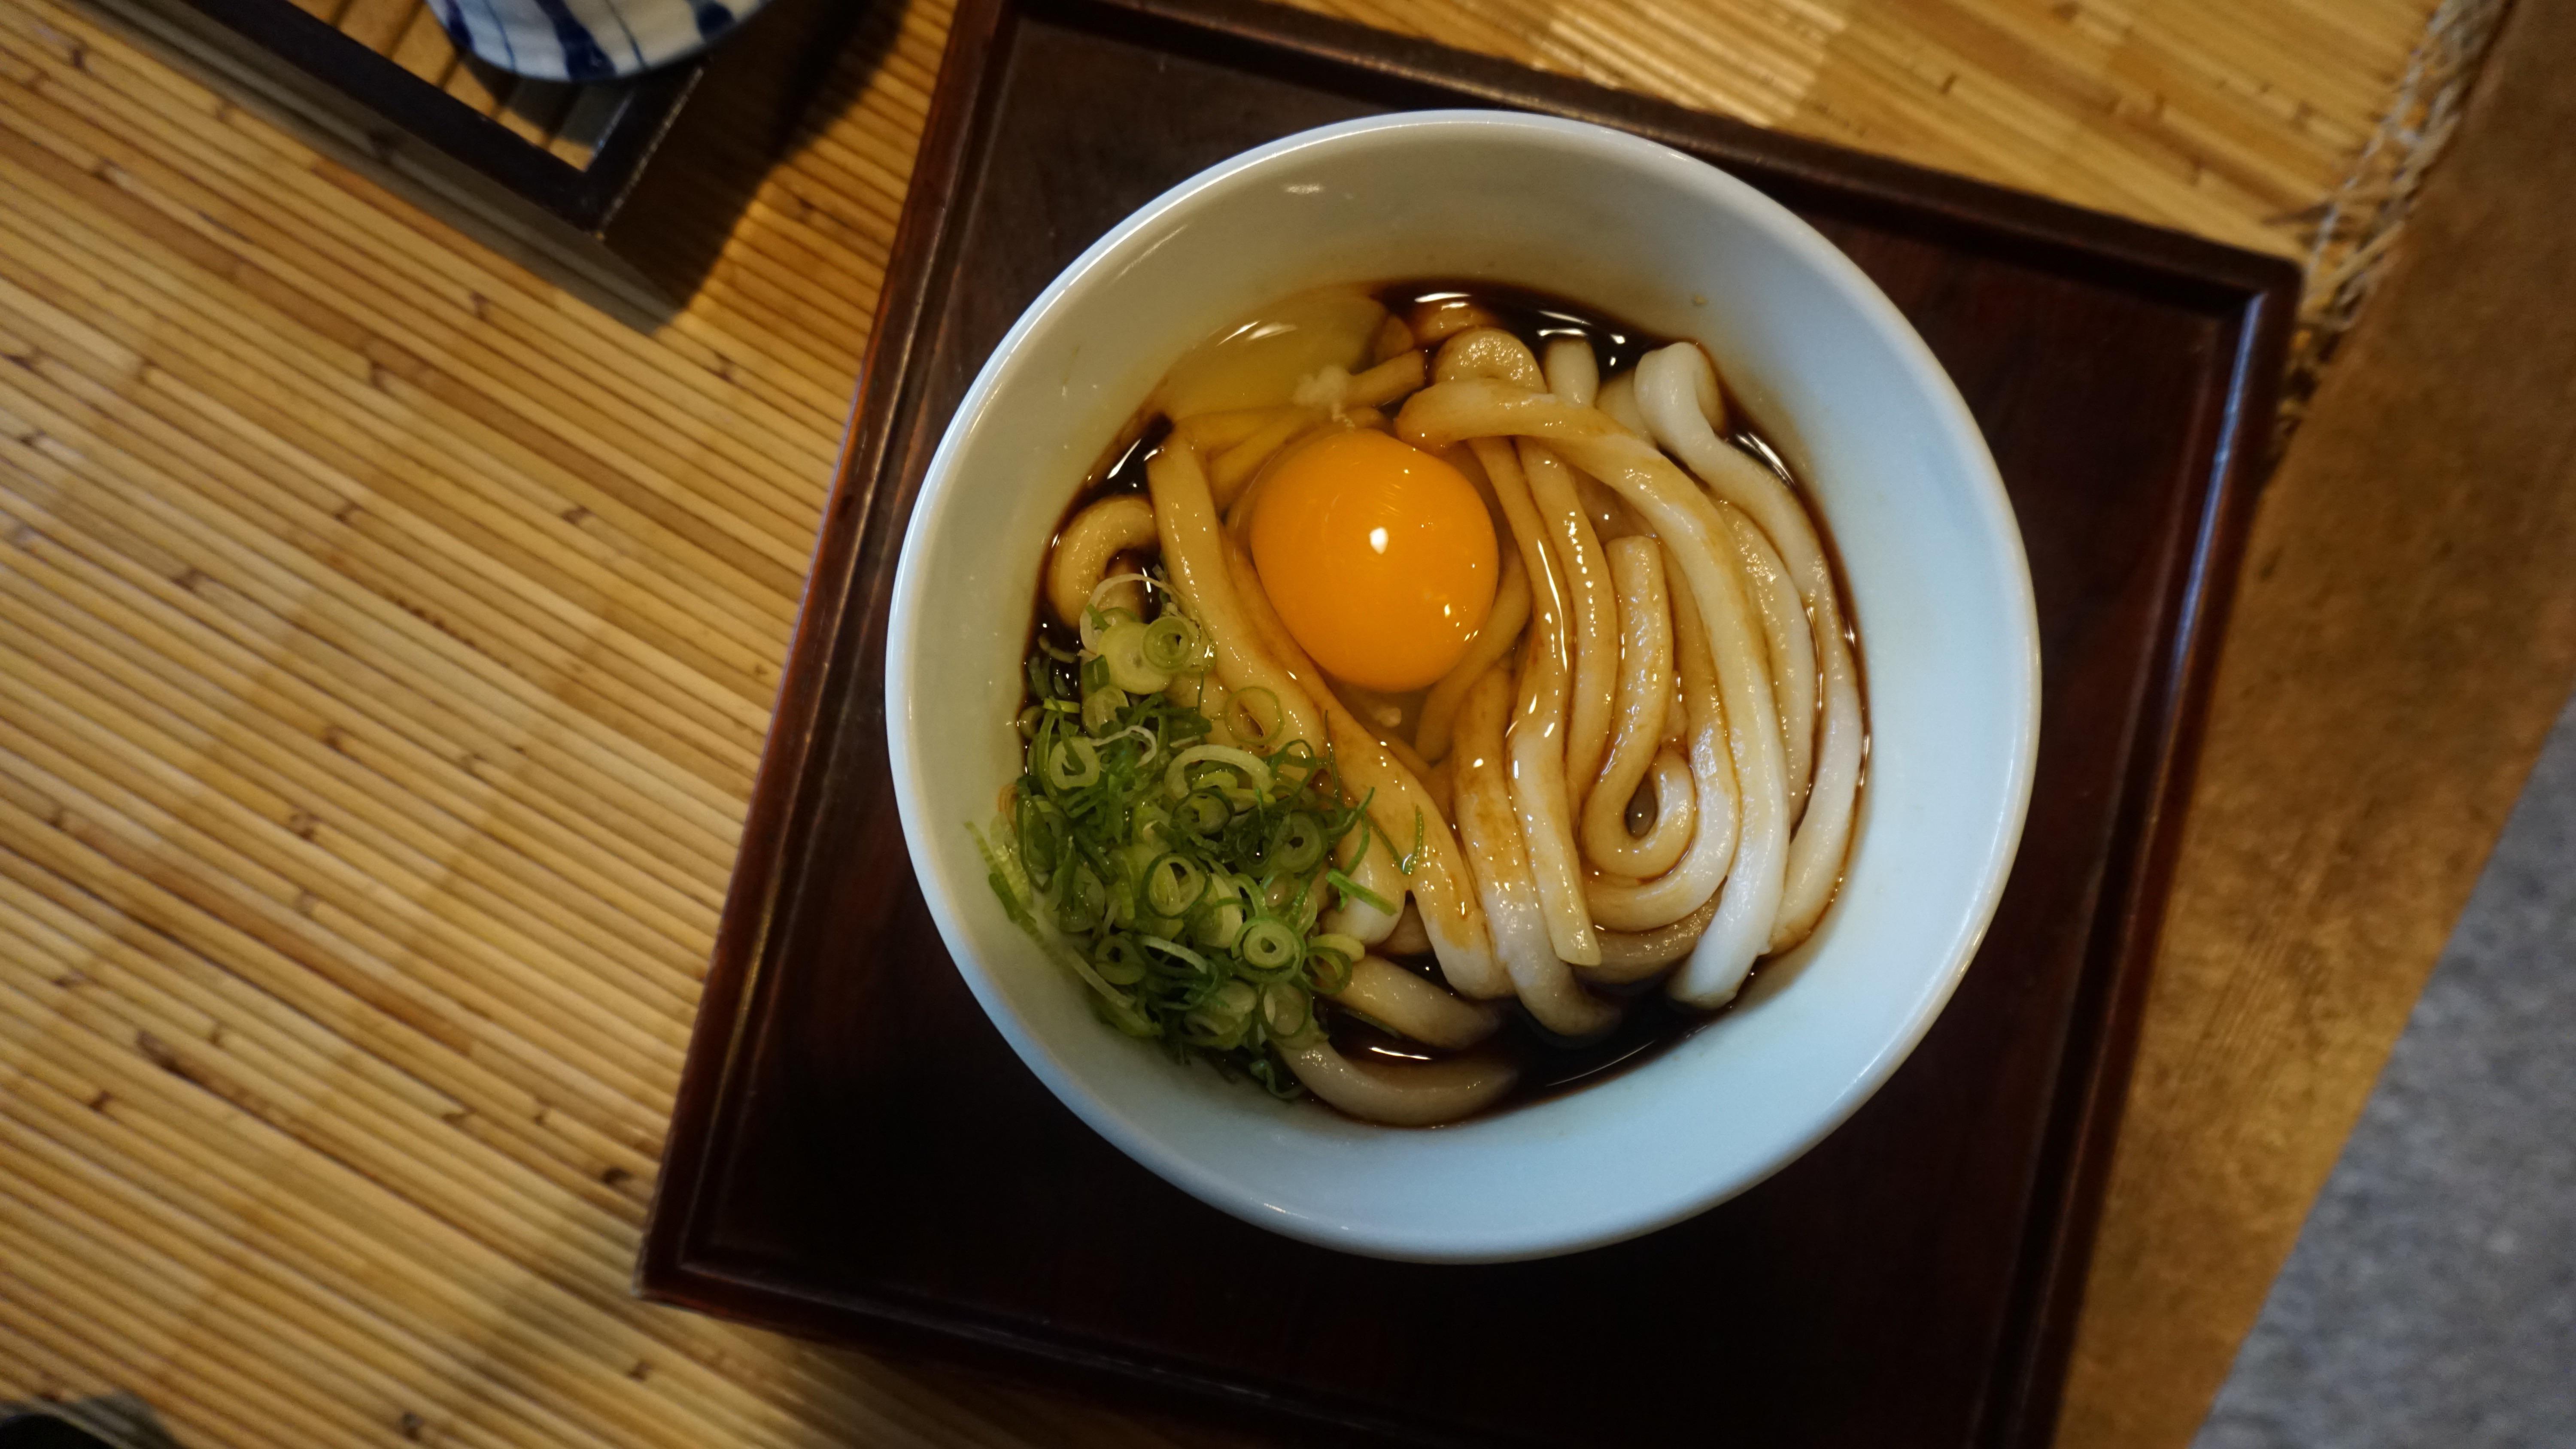 Ise Tsukimi Udon From Fukusuke Seriously The Fluffiest Udon I Ve Ever Had Dining And Cooking